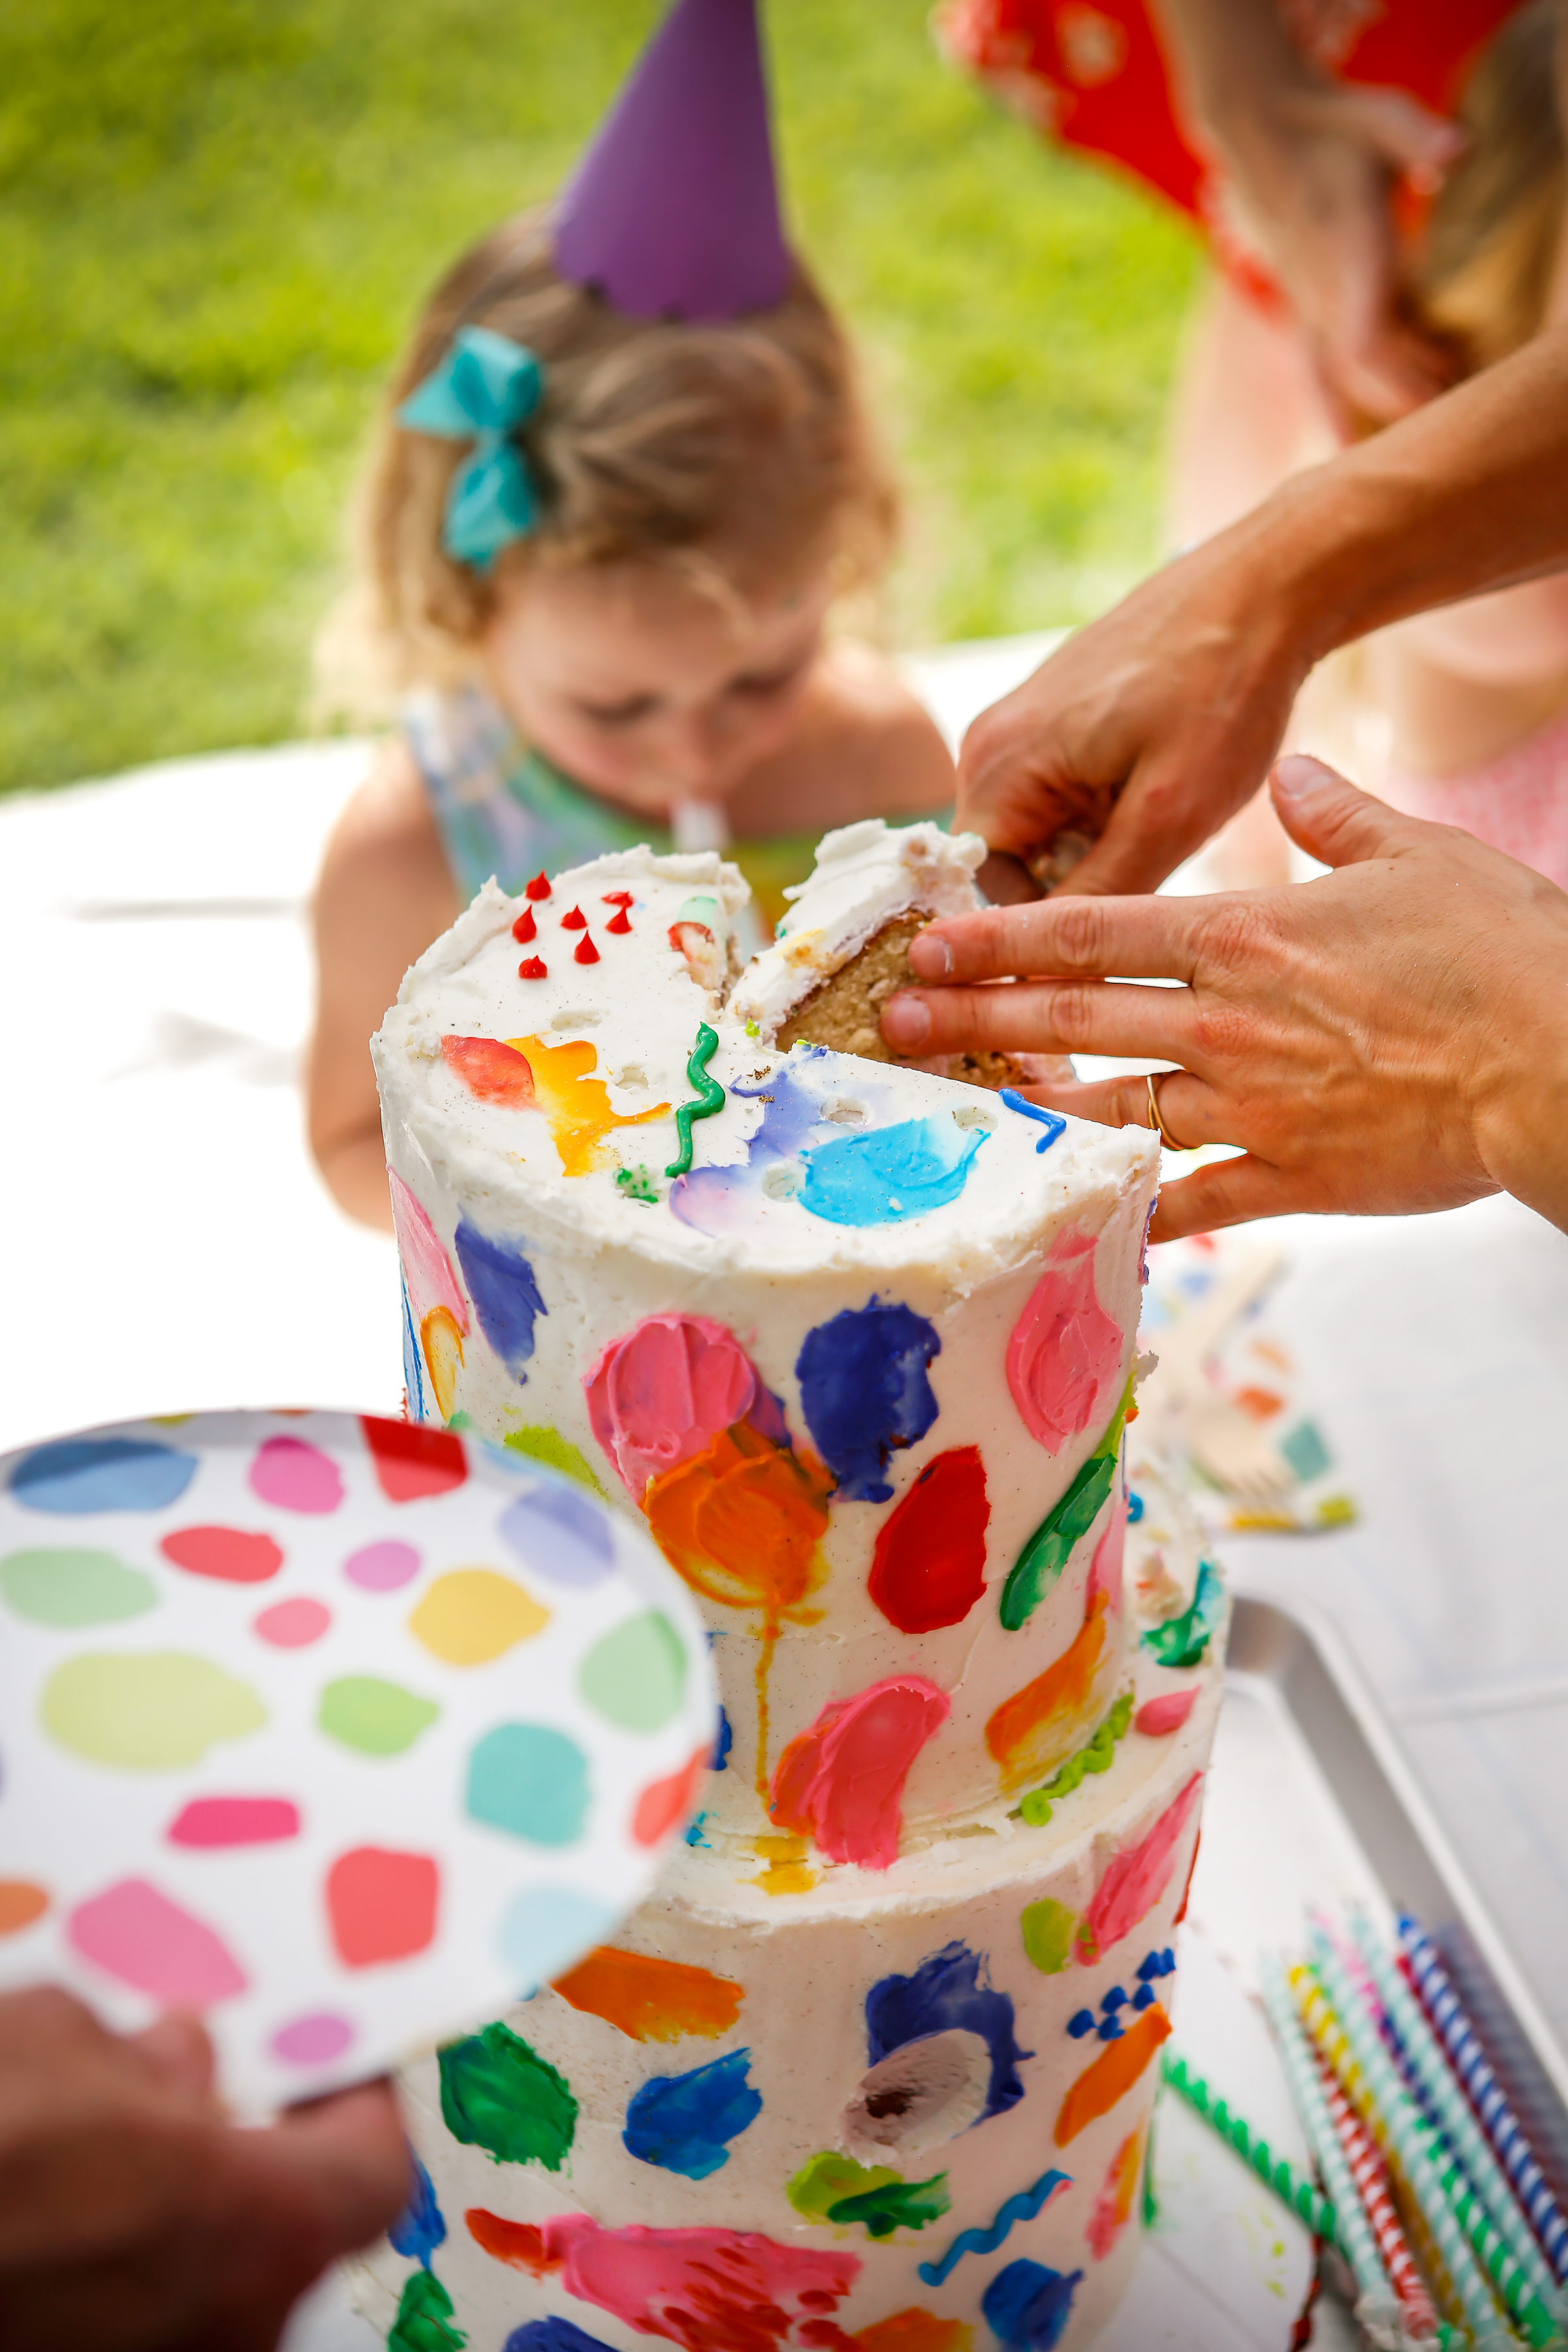 Nicole Storey of Izzabee’s Confectioners made the delicious two tiered “paint splattered” cake.